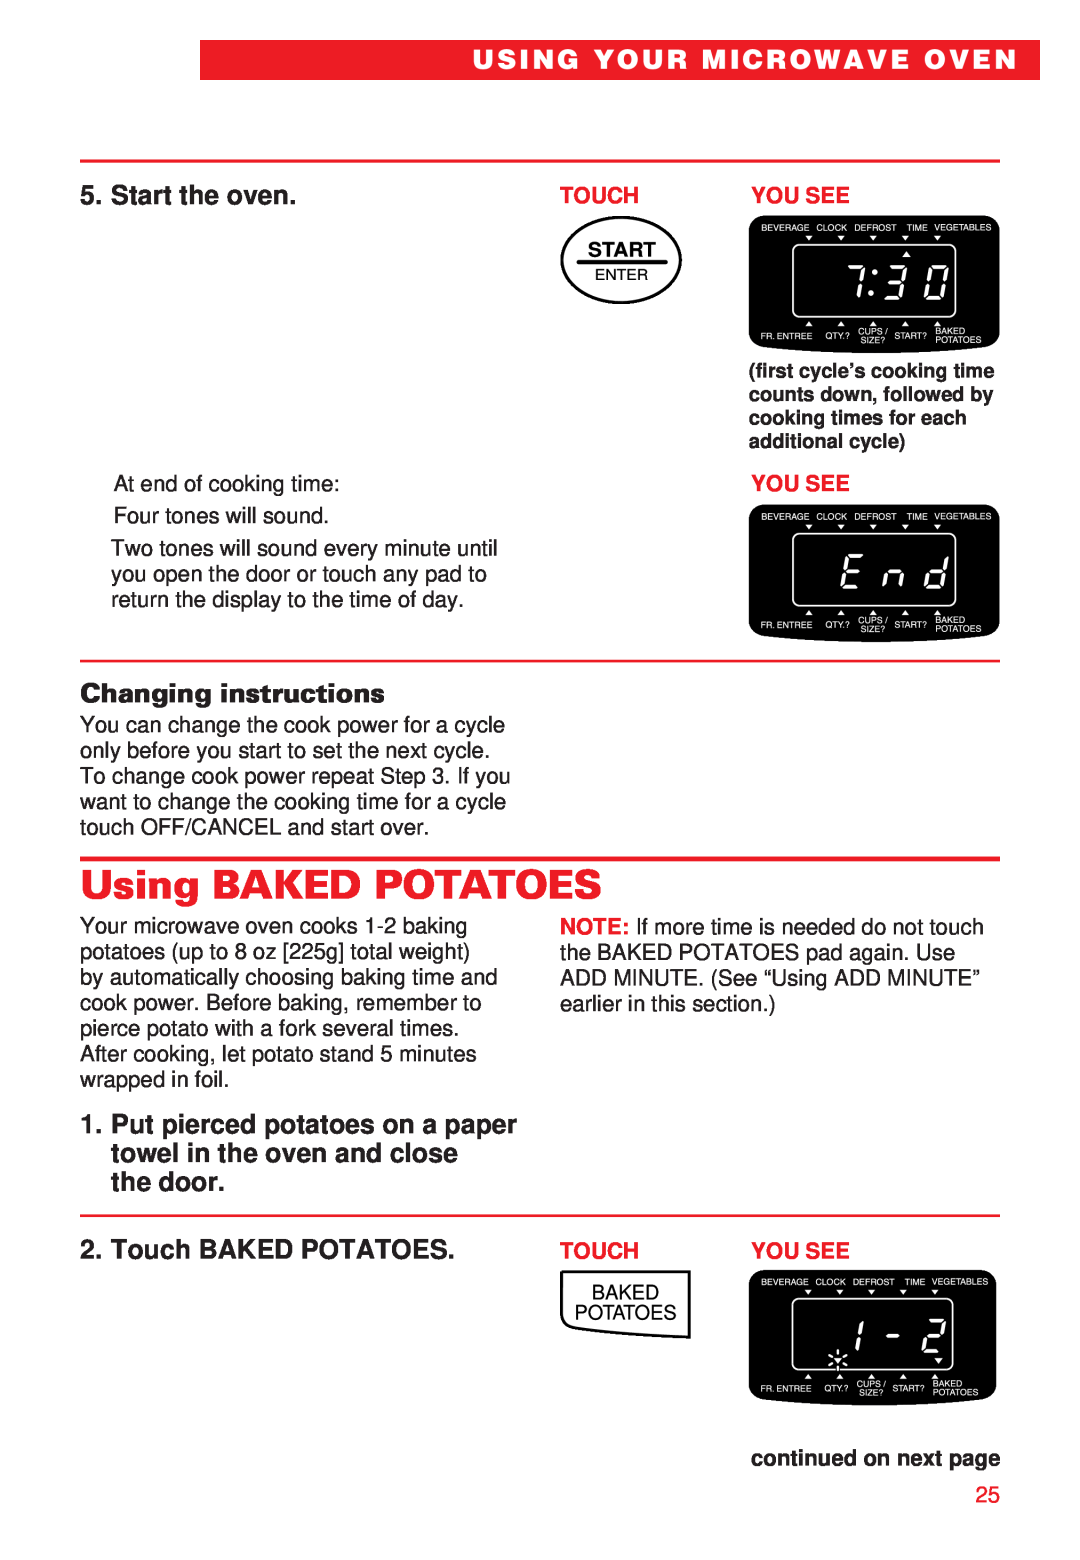 Whirlpool MT8068SE, YMT8066SE Using BAKED POTATOES, Start the oven, Changing instructions, Touch BAKED POTATOES 